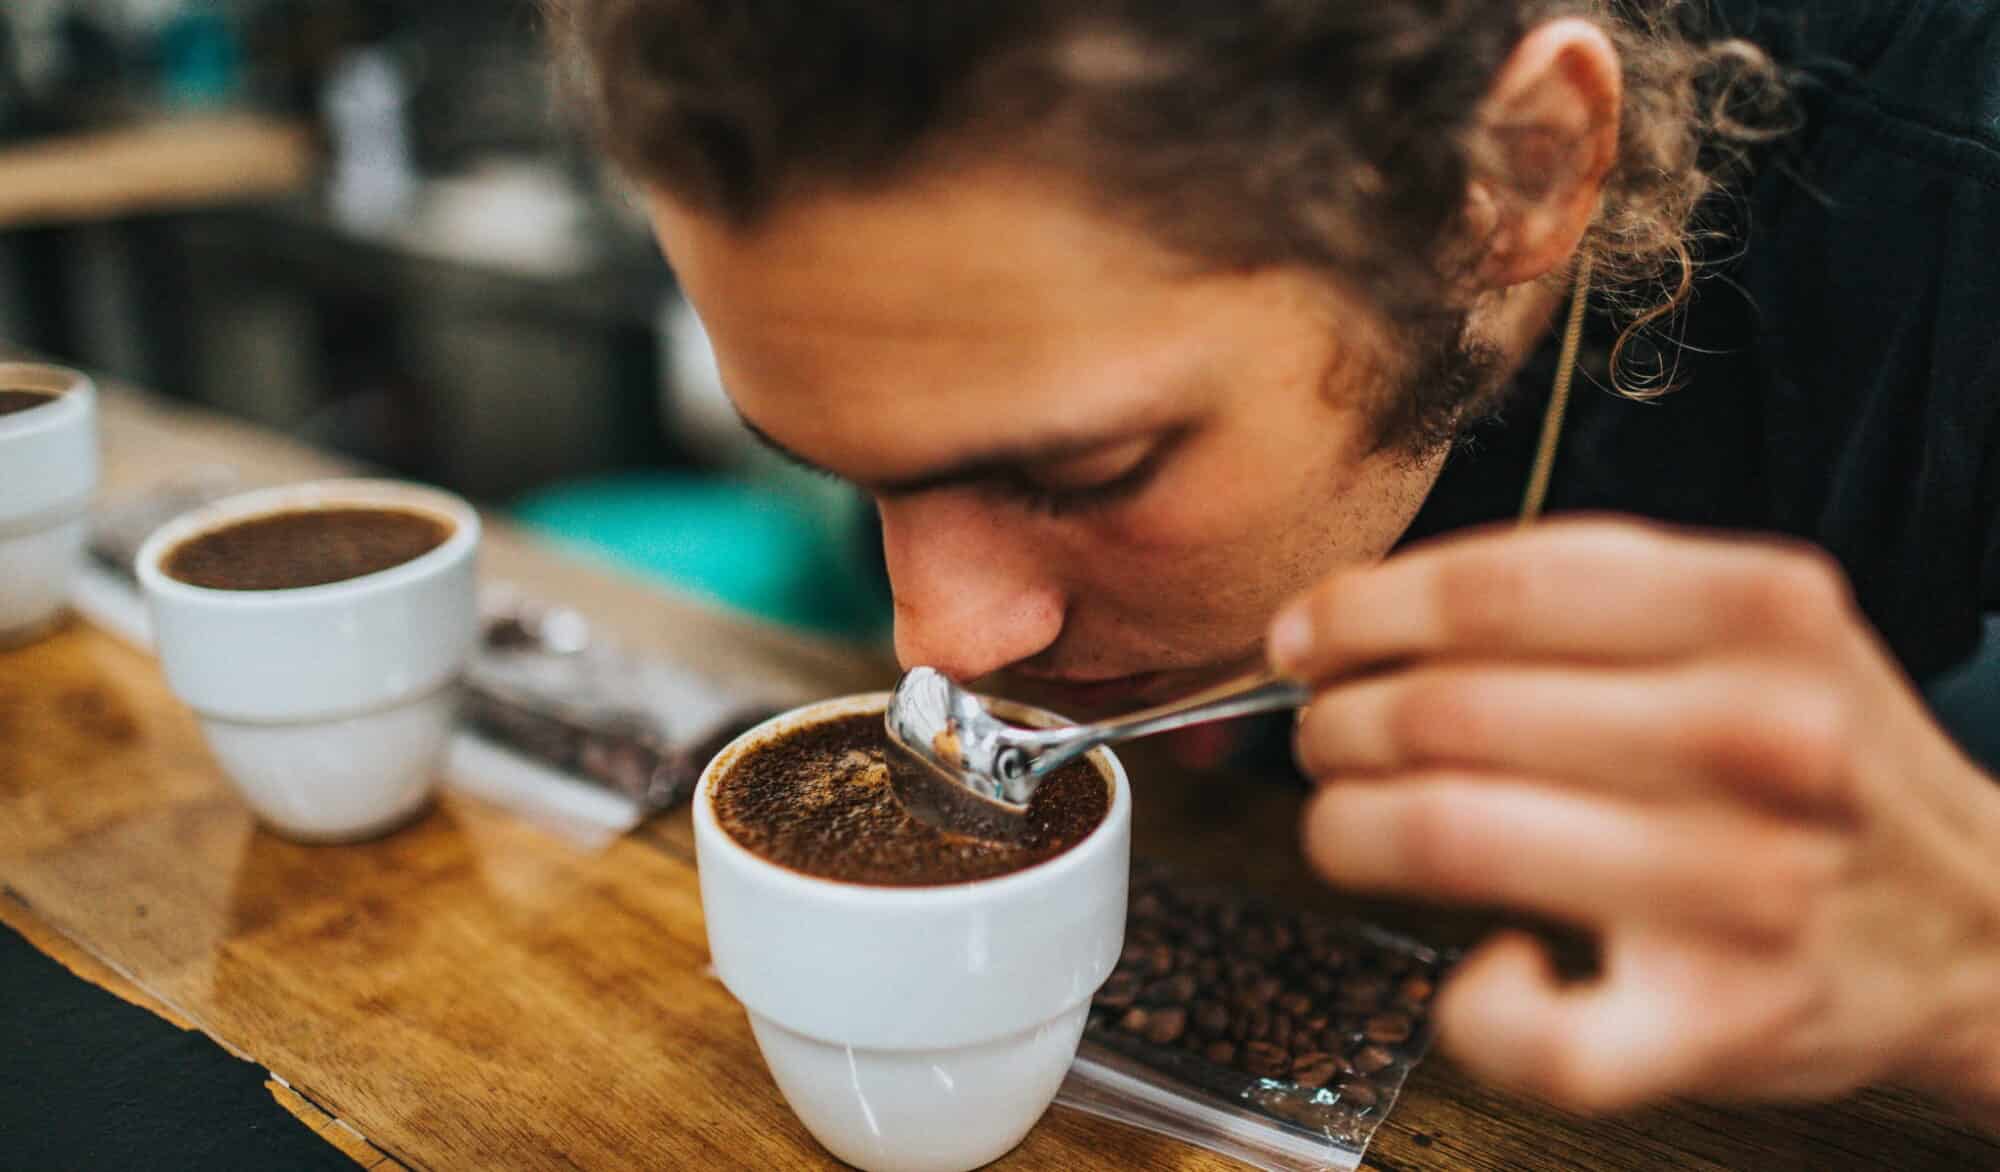 A man with brown hair tied back leans over a white cup of coffee with a spoon in his left hand, sniffing the coffee.